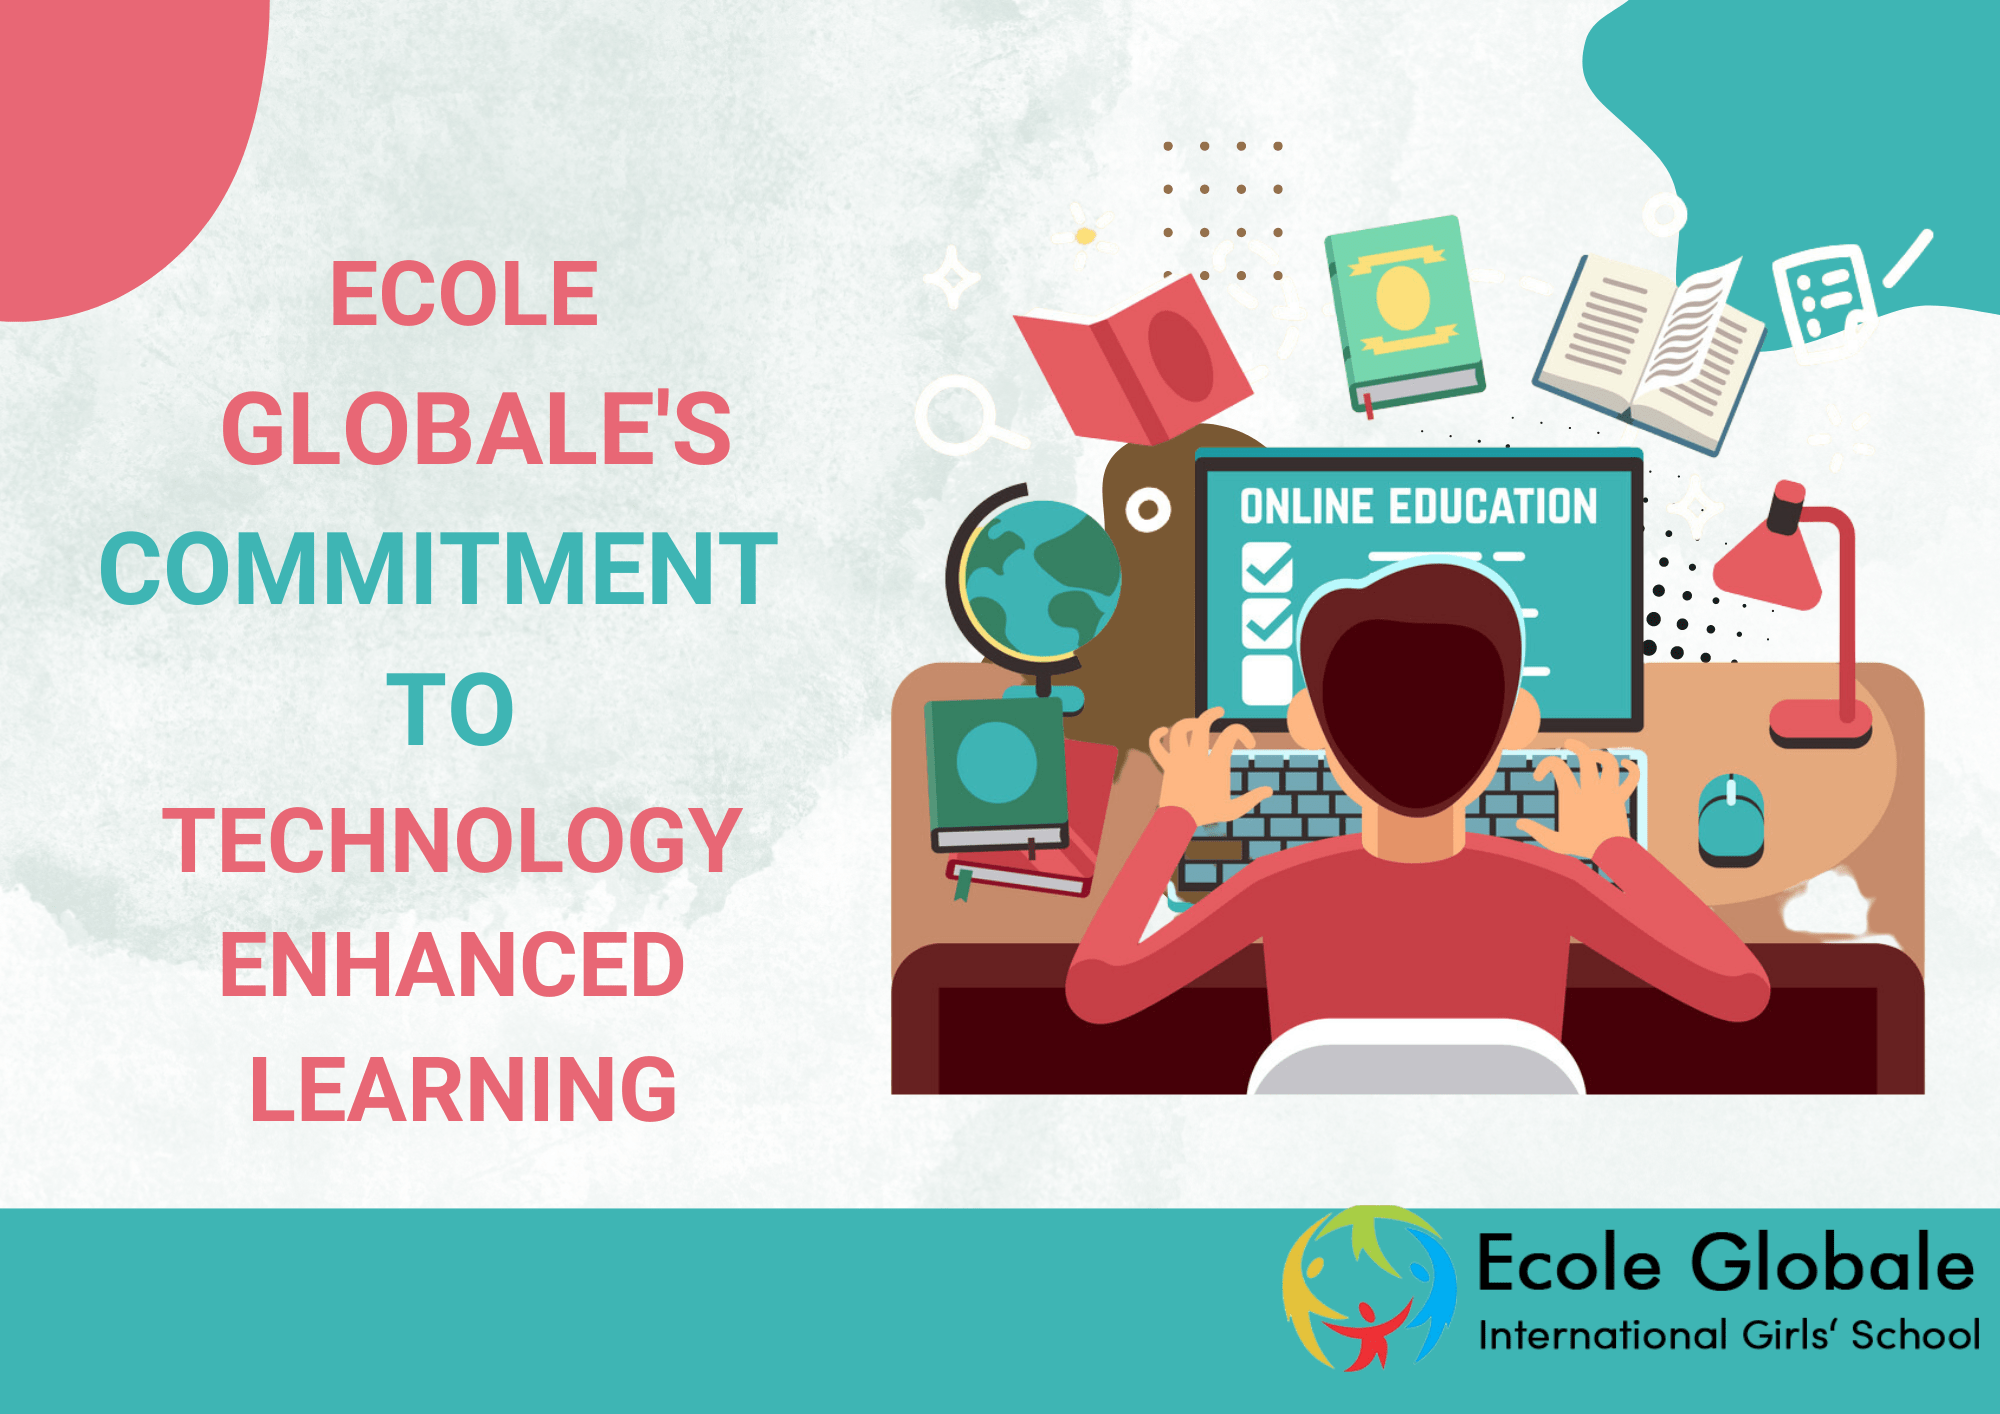 You are currently viewing Ecole Globale’s Commitment to Technology Enhanced Learning